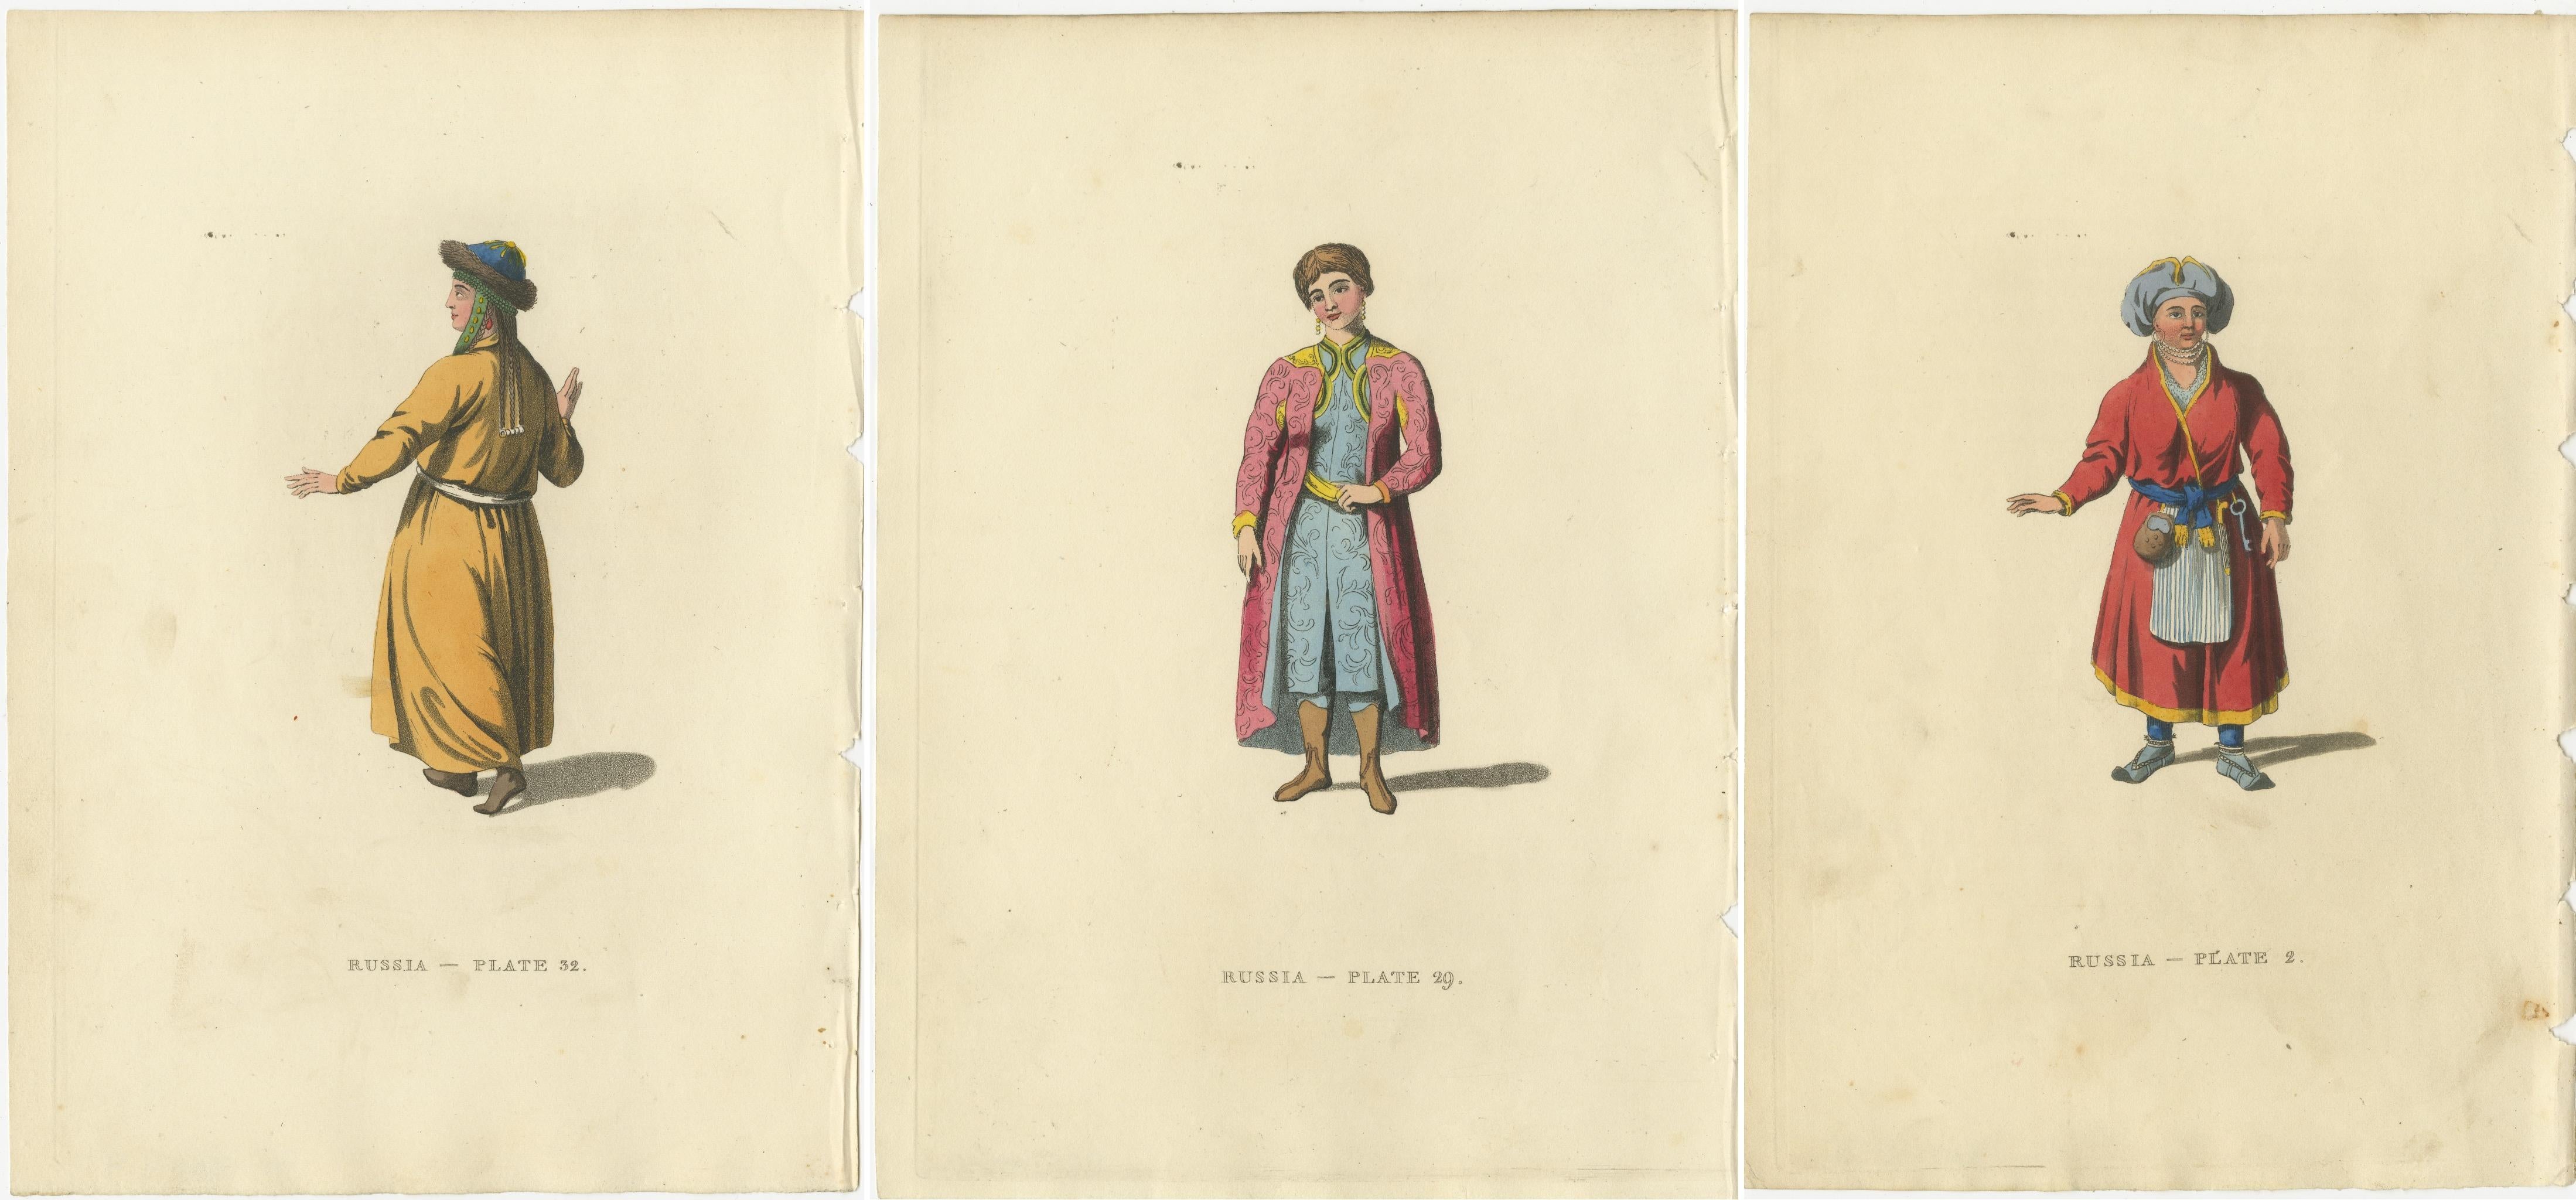 These original antique images are colored engravings that represent the traditional attire of three female inhabitants from different ethnic groups within the Russian Empire as of the early 19th century. The subjects of the engravings are a Lapland